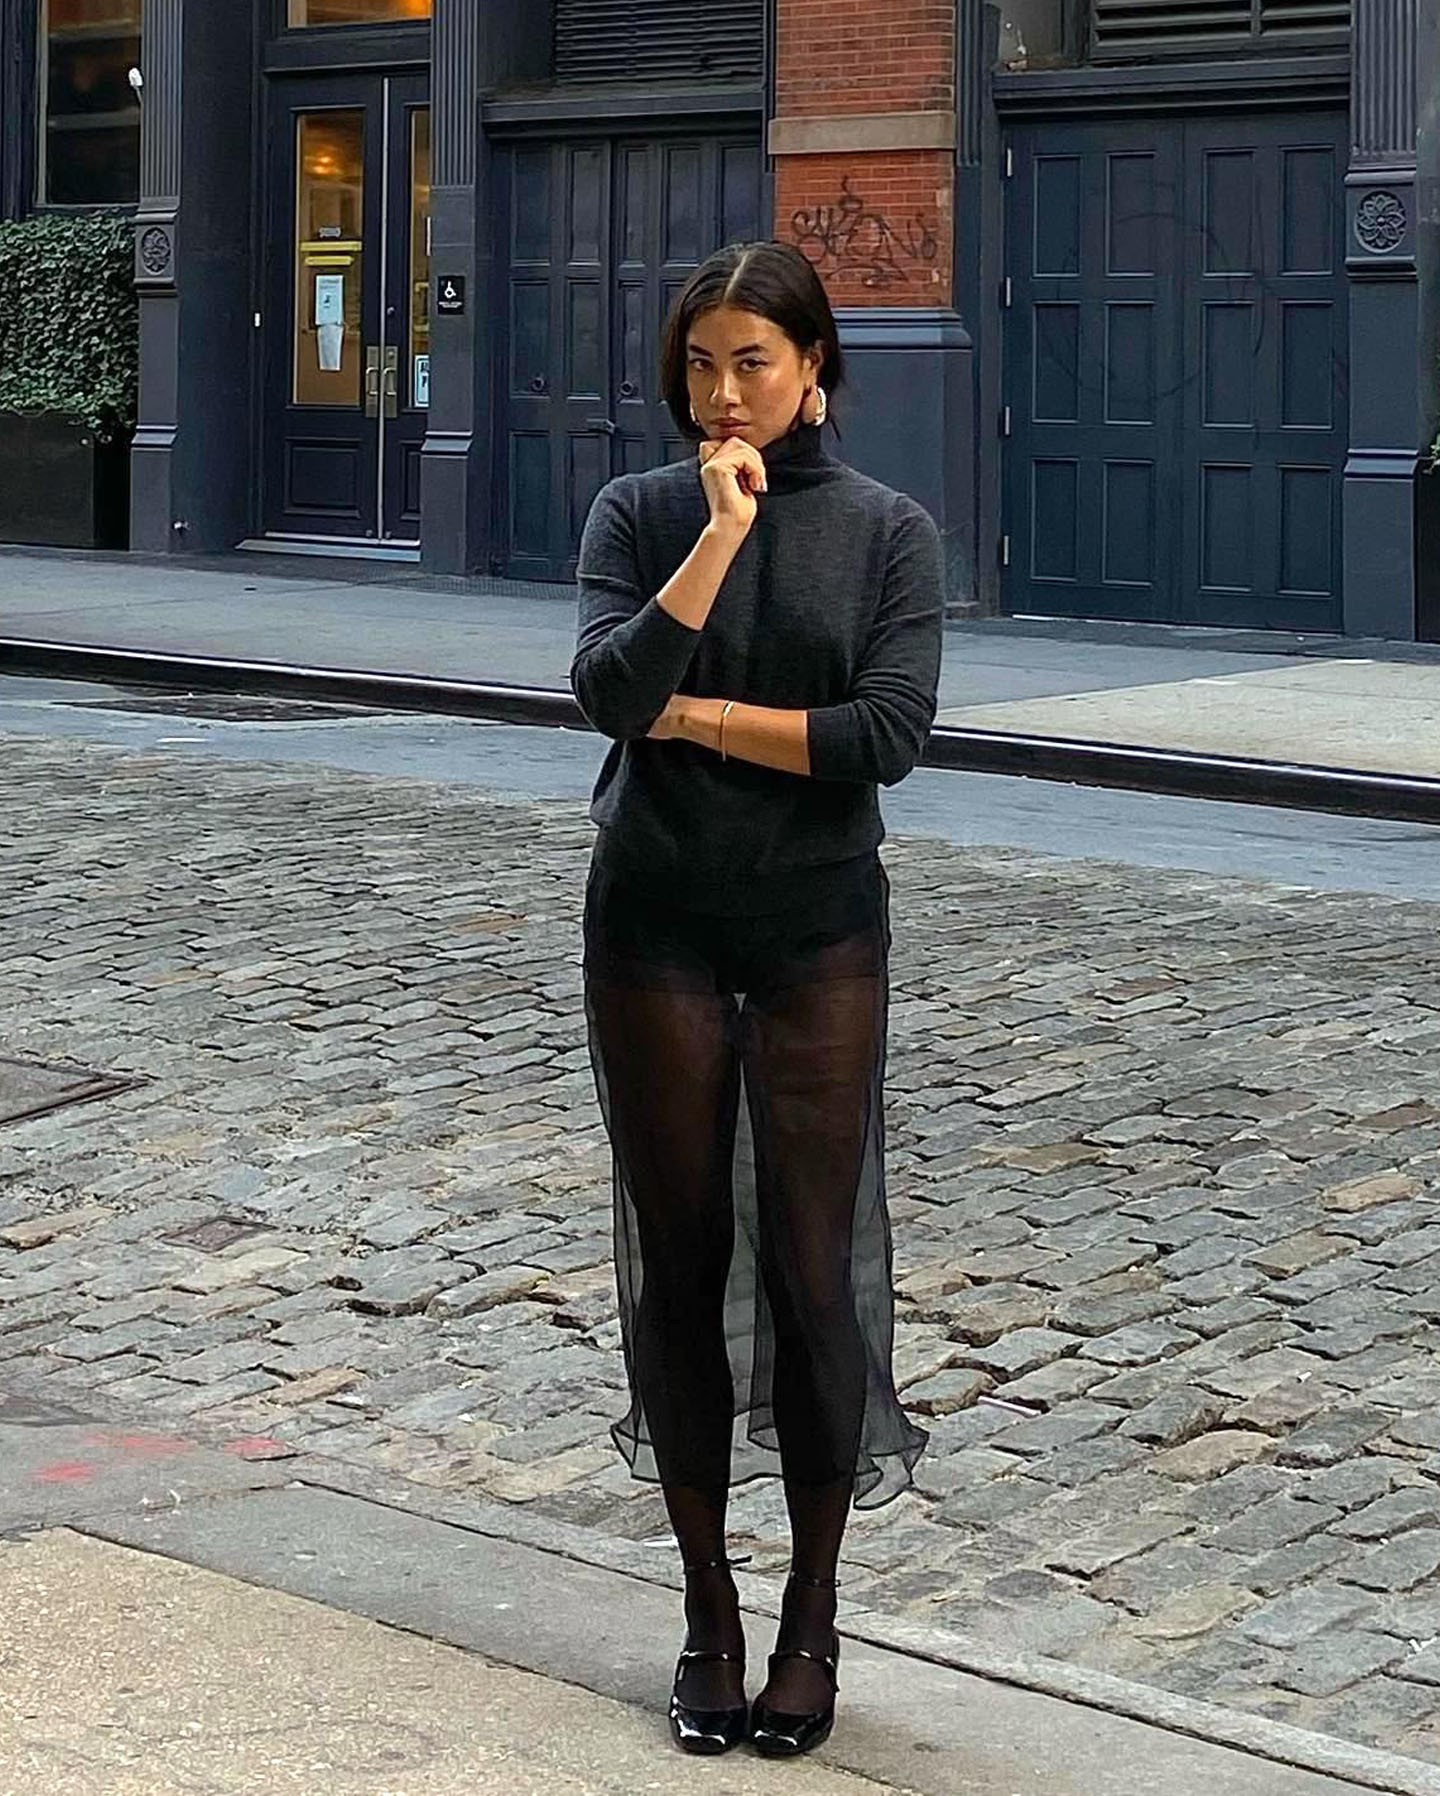 fashion influencer Sasha Mei posing in a gray turtleneck sweater and black sheer skirt